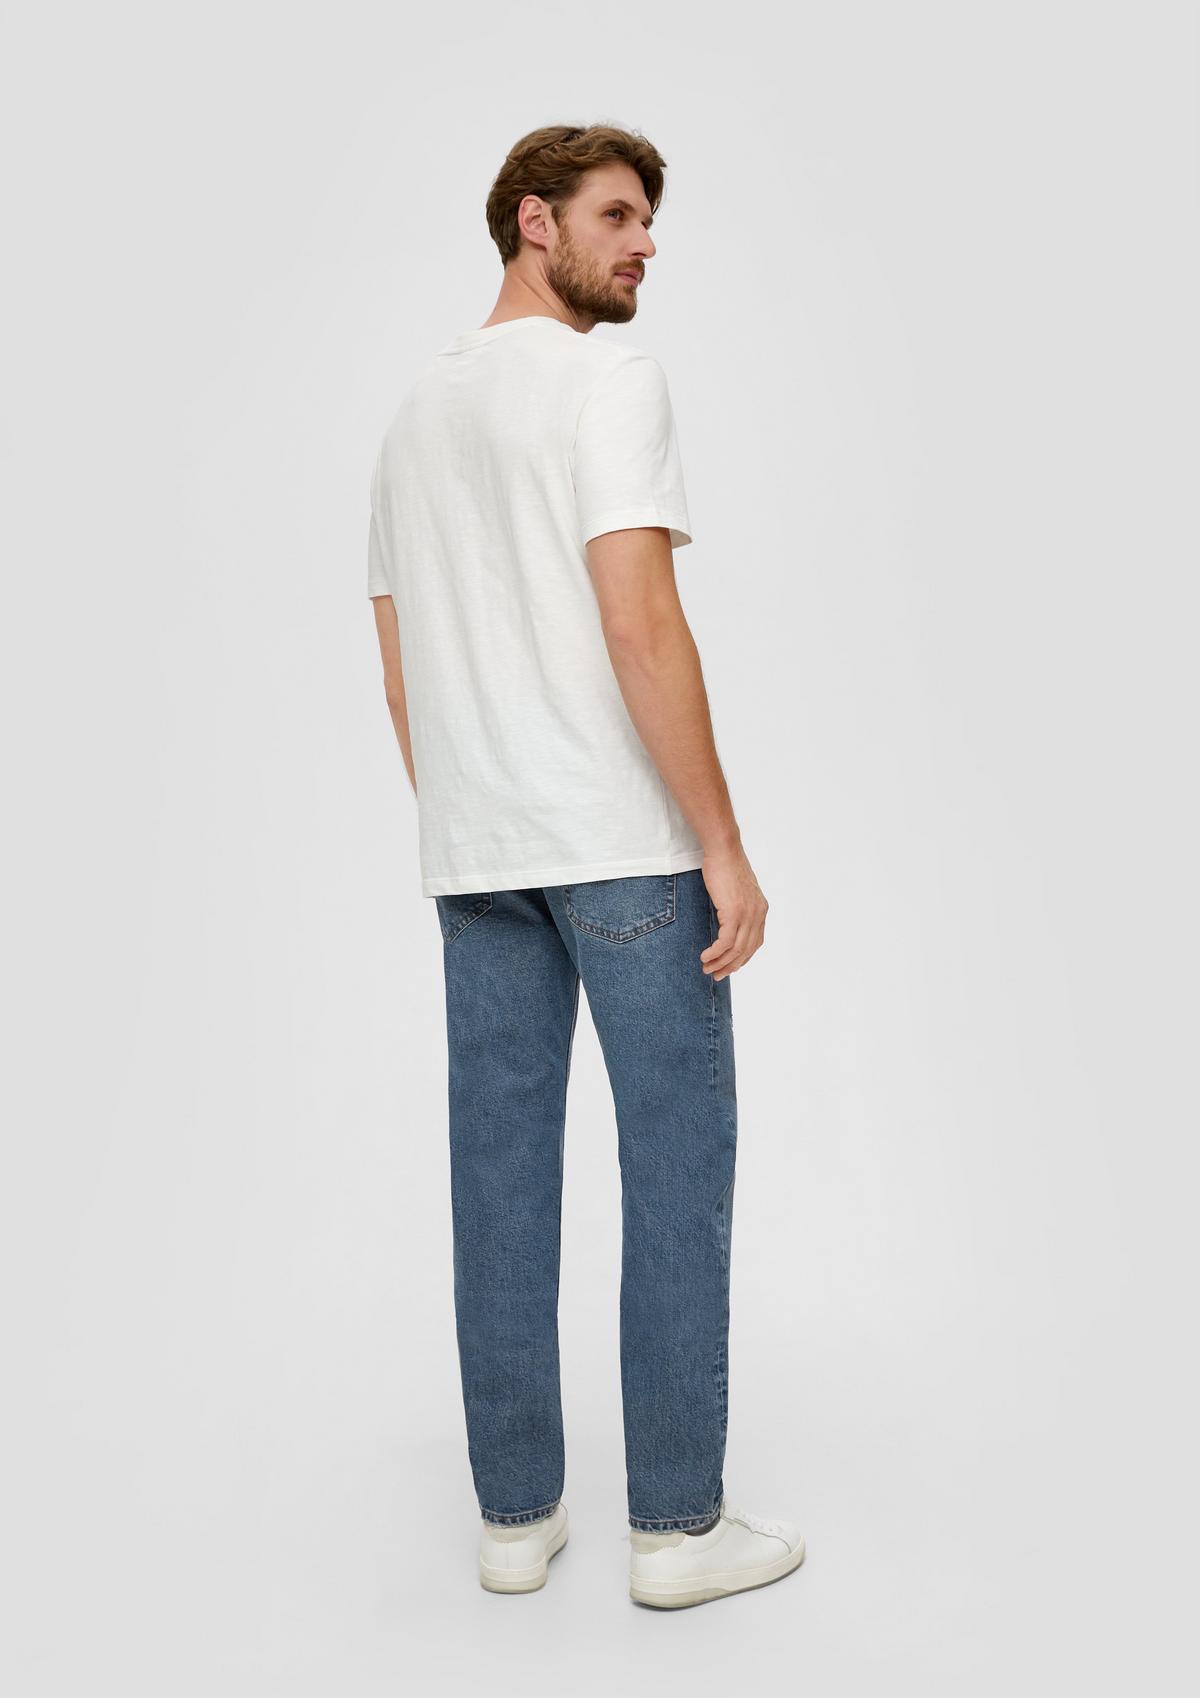 Mauro jeans / regular fit / high rise / tapered leg - blue | s.Oliver